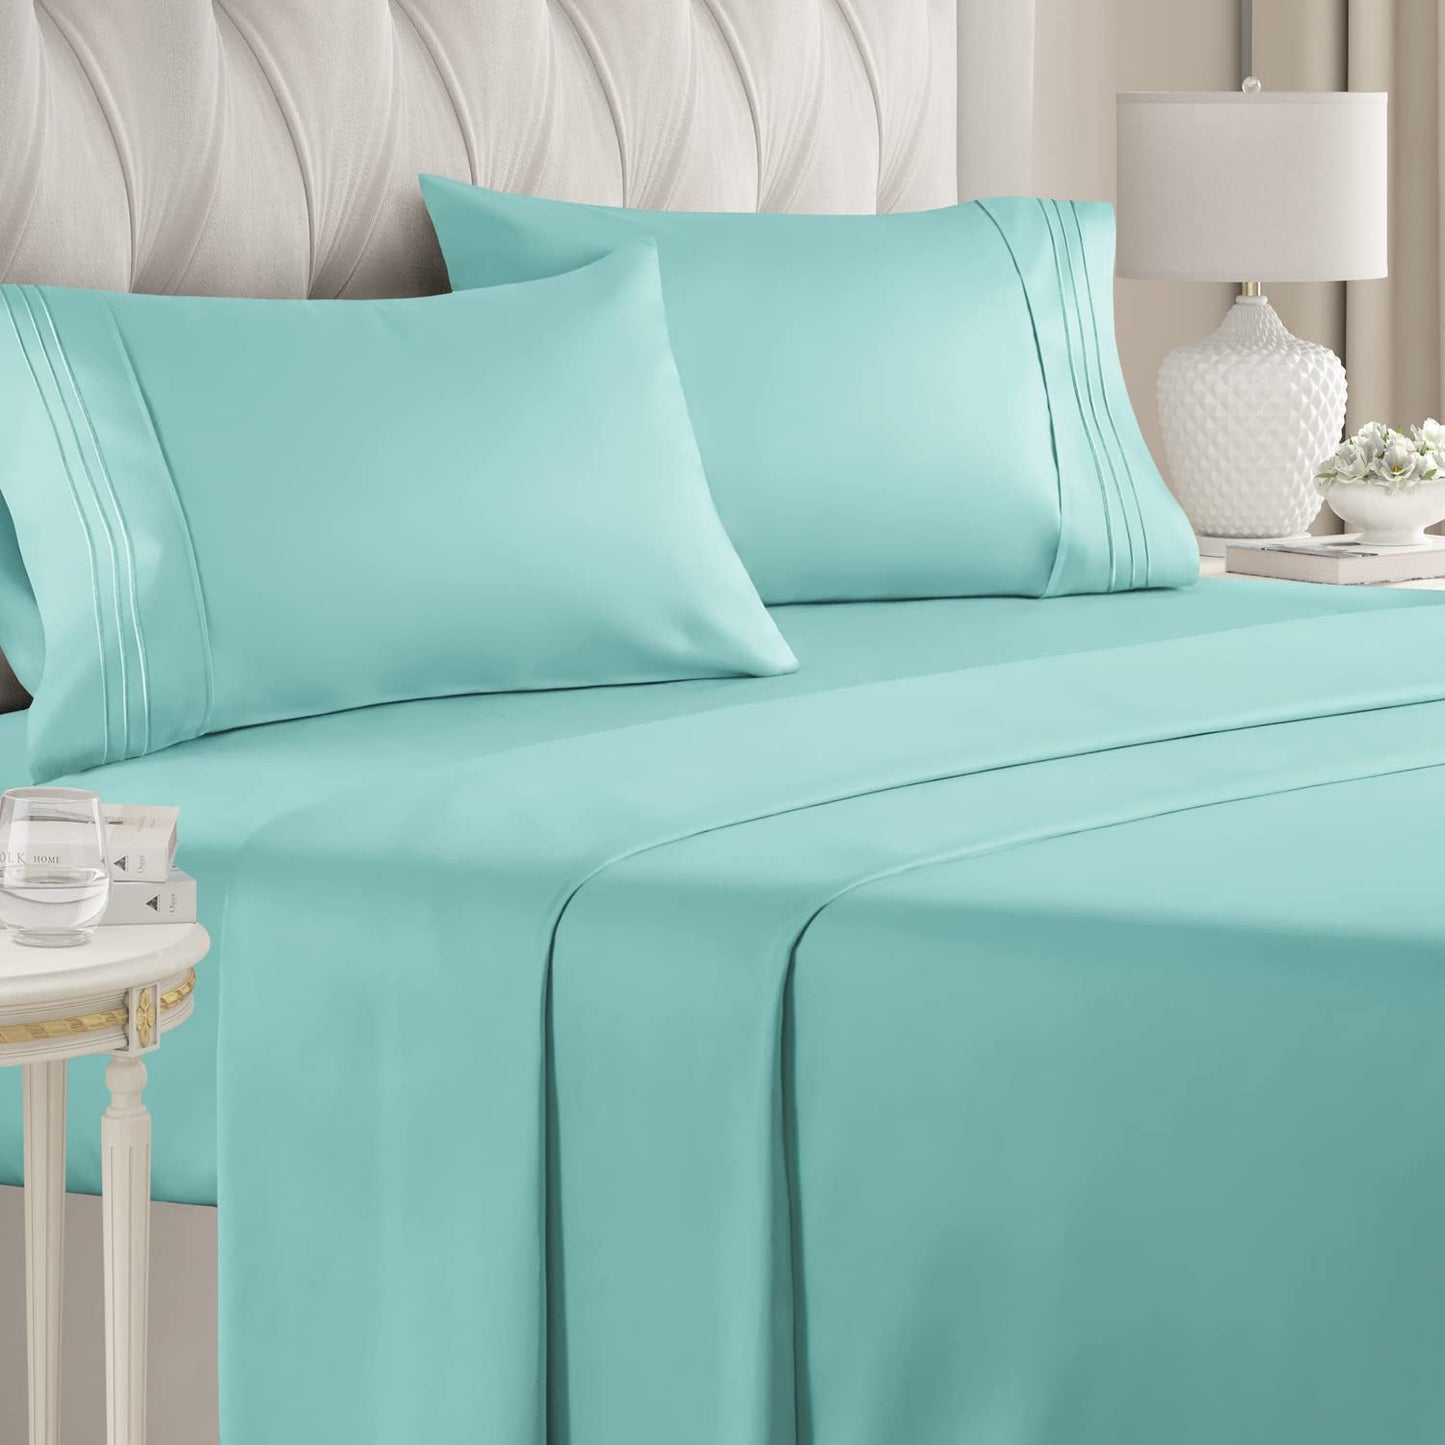 Buy Queen Size Flat Sheet Aqua Blue Egyptian Cotton 1000 Thread Count at- Egyptianhomelinens.com